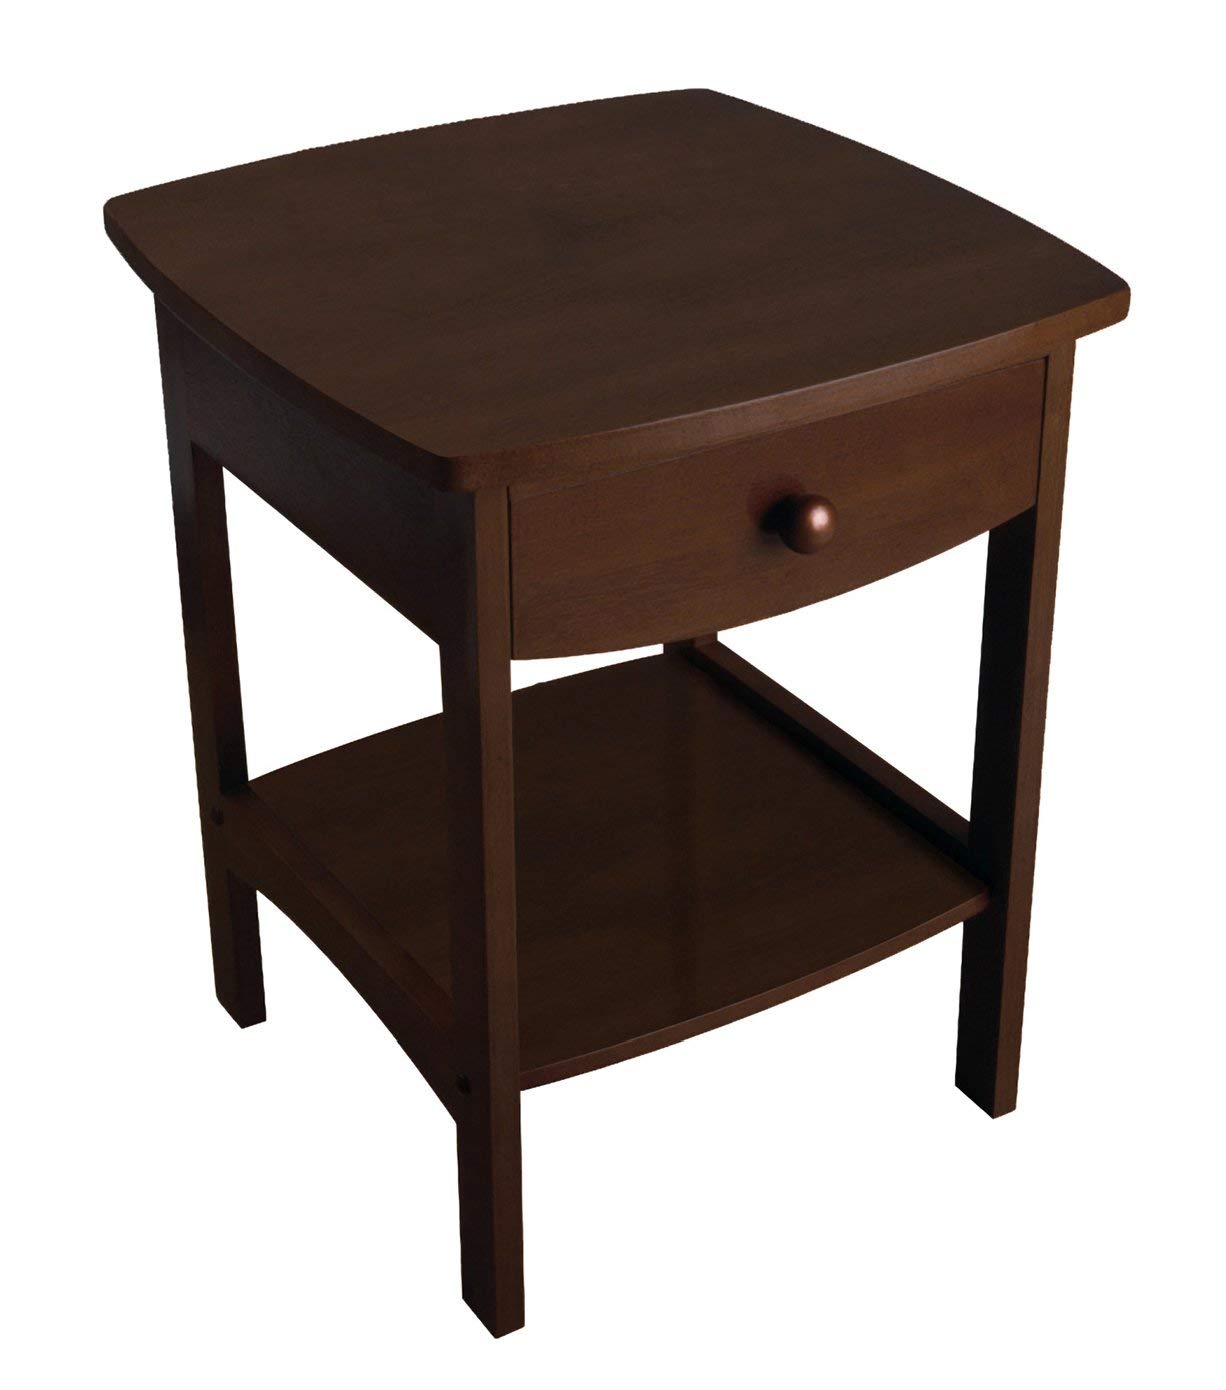 winsome wood claire accent table walnut kitchen navy blue dining oval patio cover drum side cocktail sets pier one frames coffee ikea metal wine rack safavieh kennedy cherry room